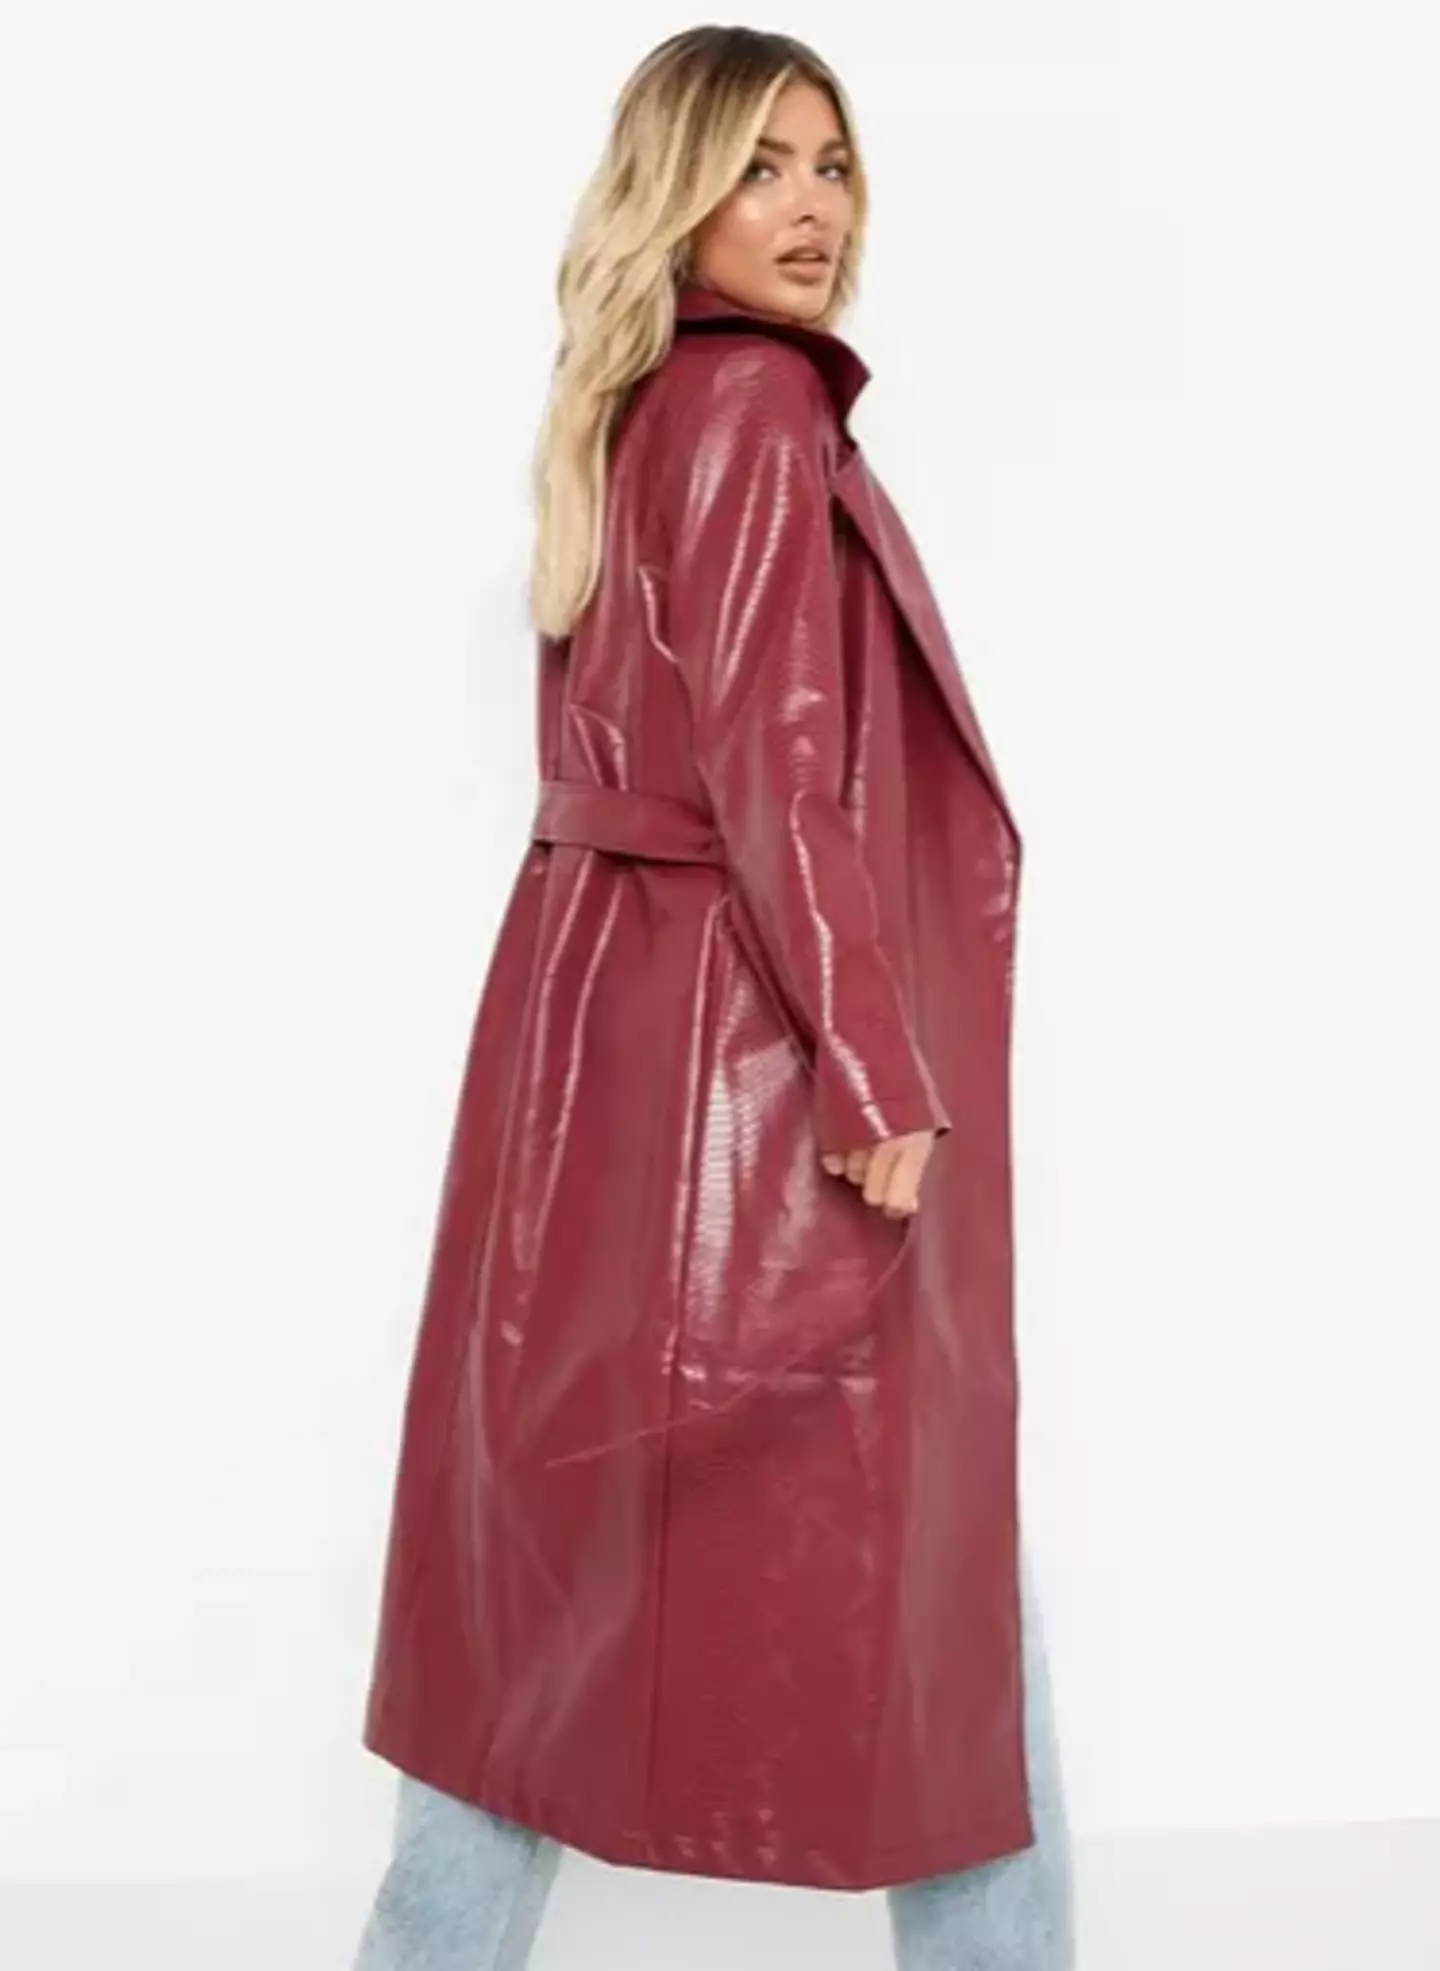 This Boohoo doppelganger is only £40. [